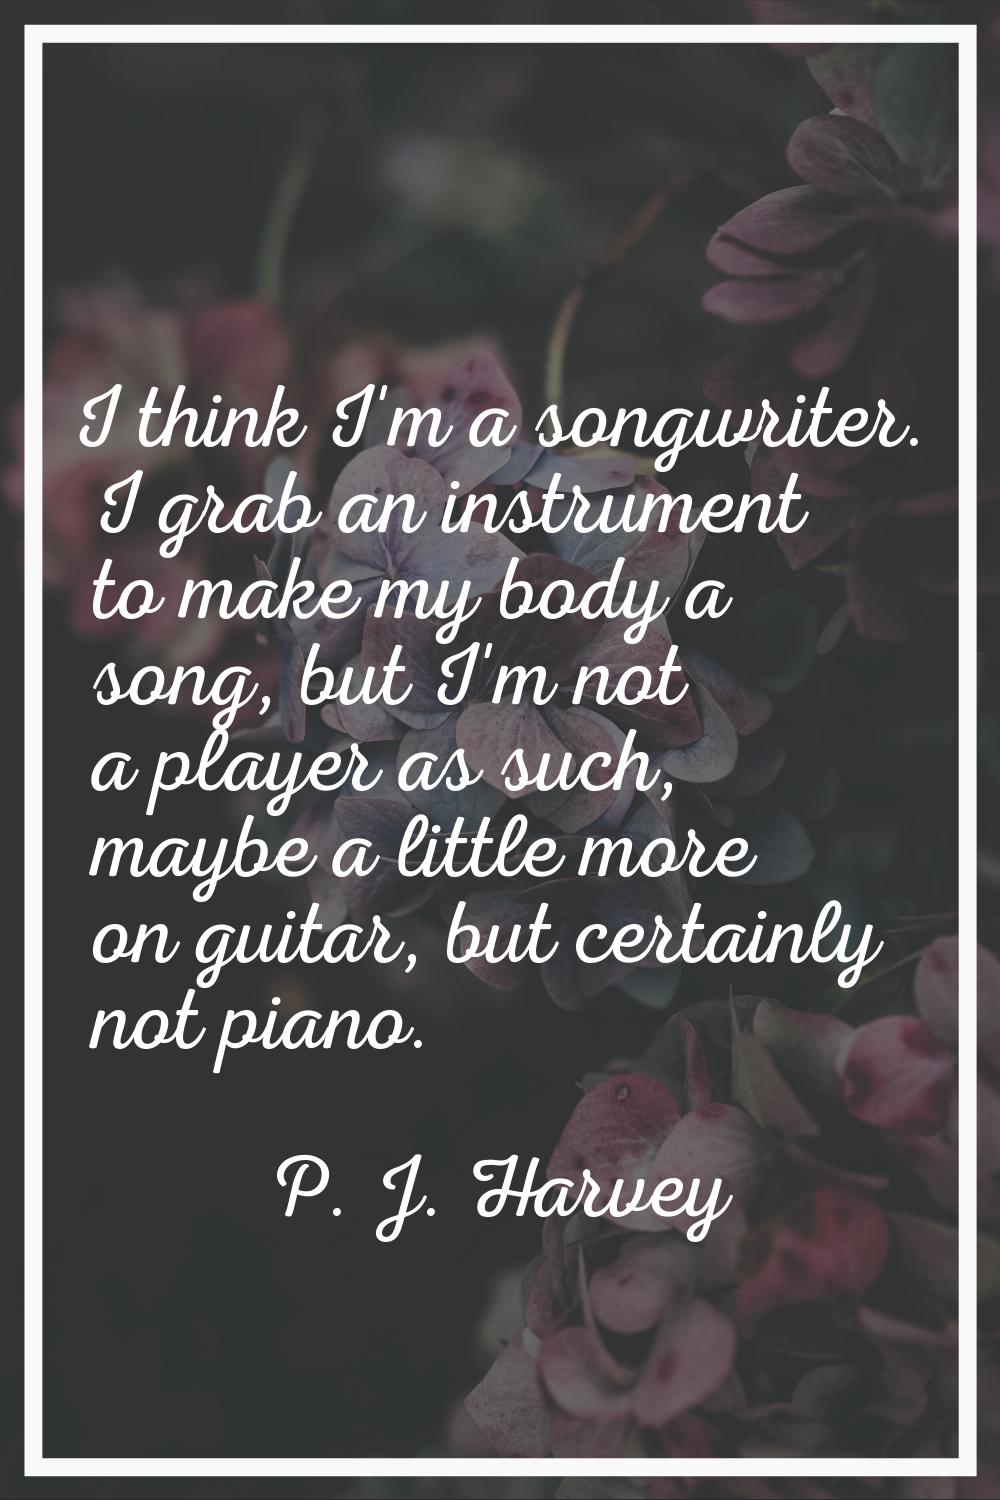 I think I'm a songwriter. I grab an instrument to make my body a song, but I'm not a player as such